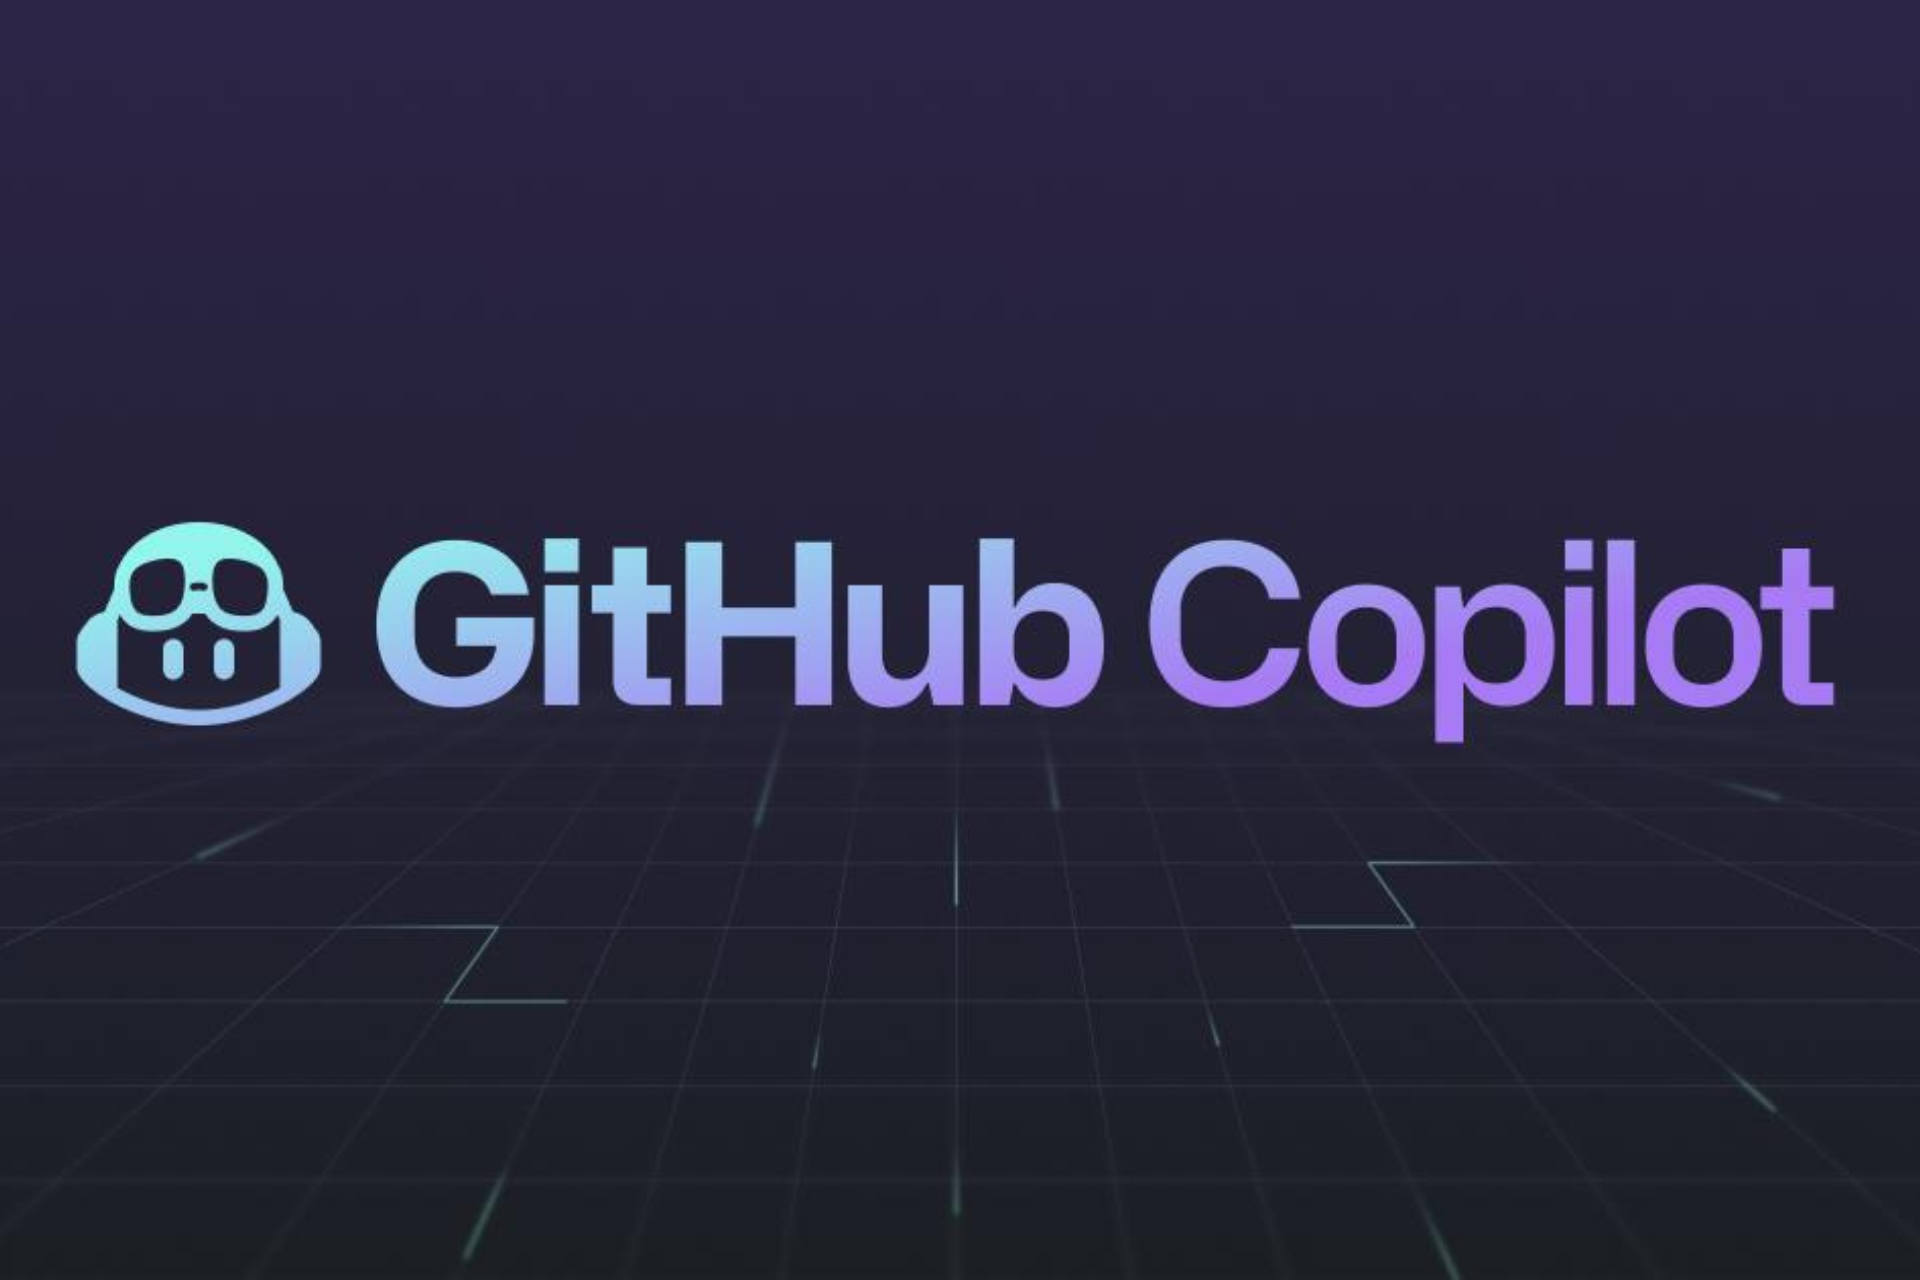 GitHub Copilot user growth is increasing and has reached 1.3 million